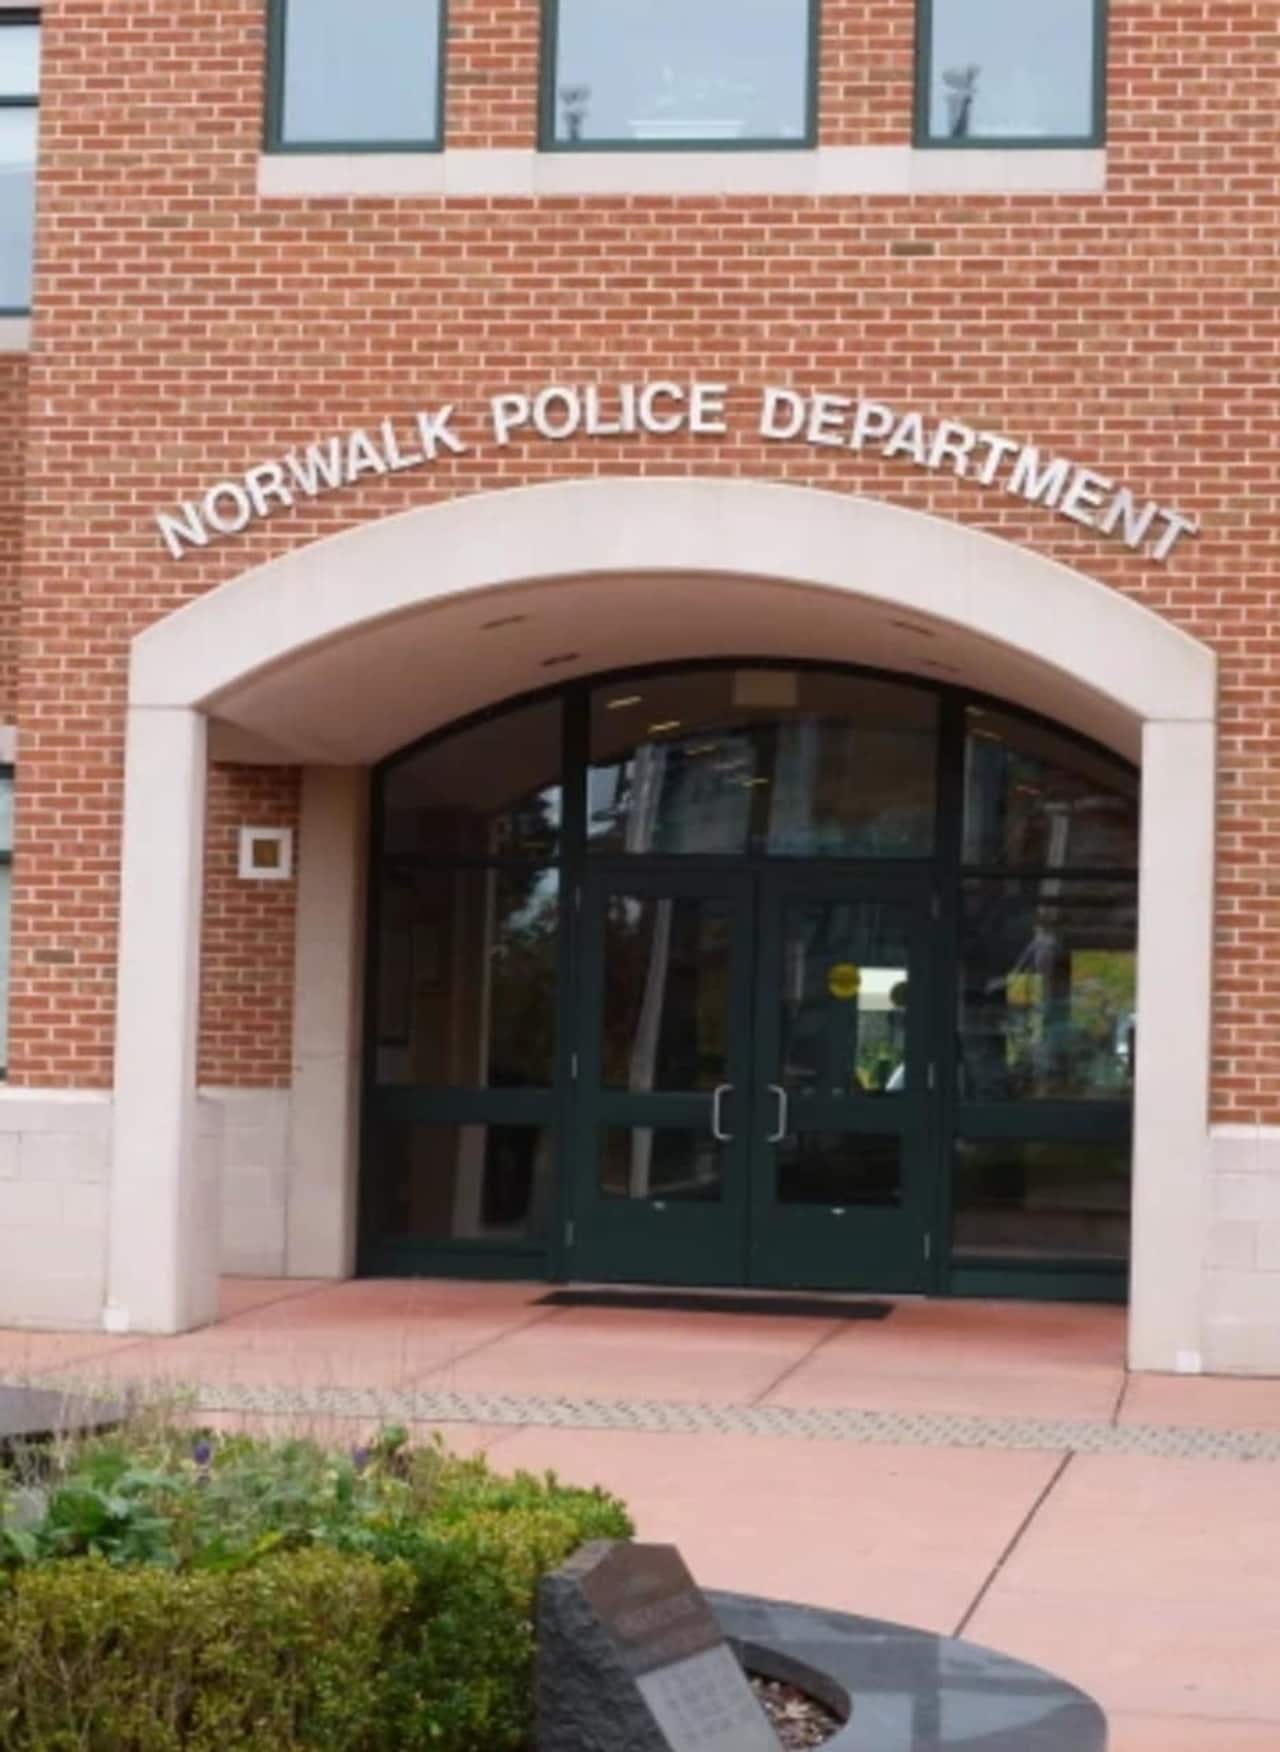 Norwalk Police are investigating a reported residential burglary on Academy Street.